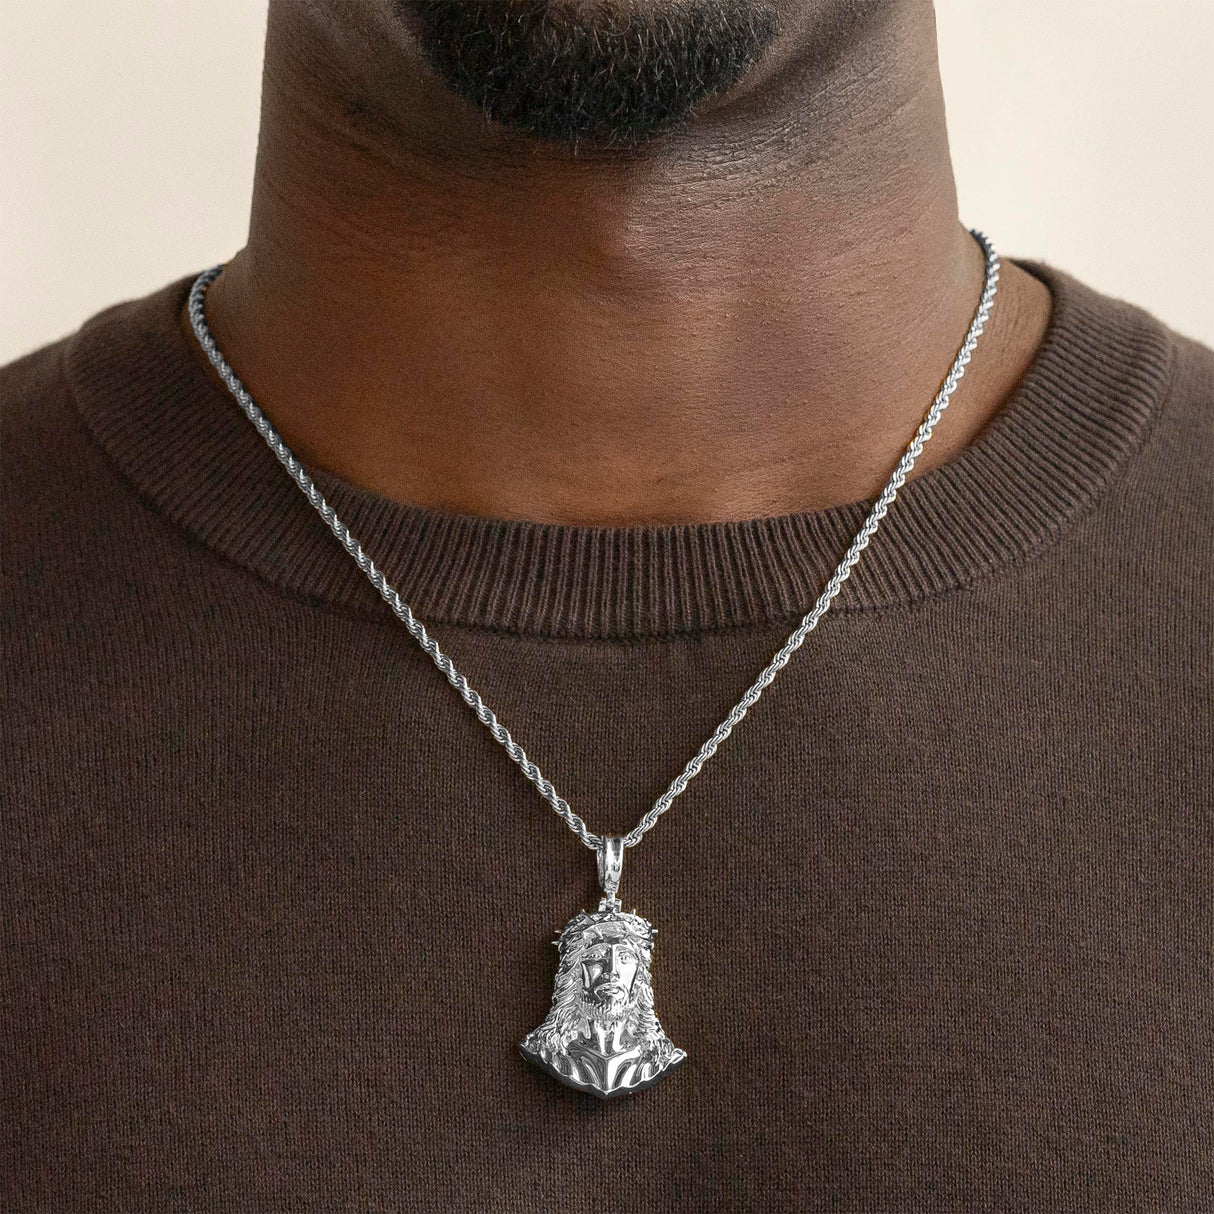 Jesus Piece Necklace Pendant & Rope Chain The Gold Gods White Gold